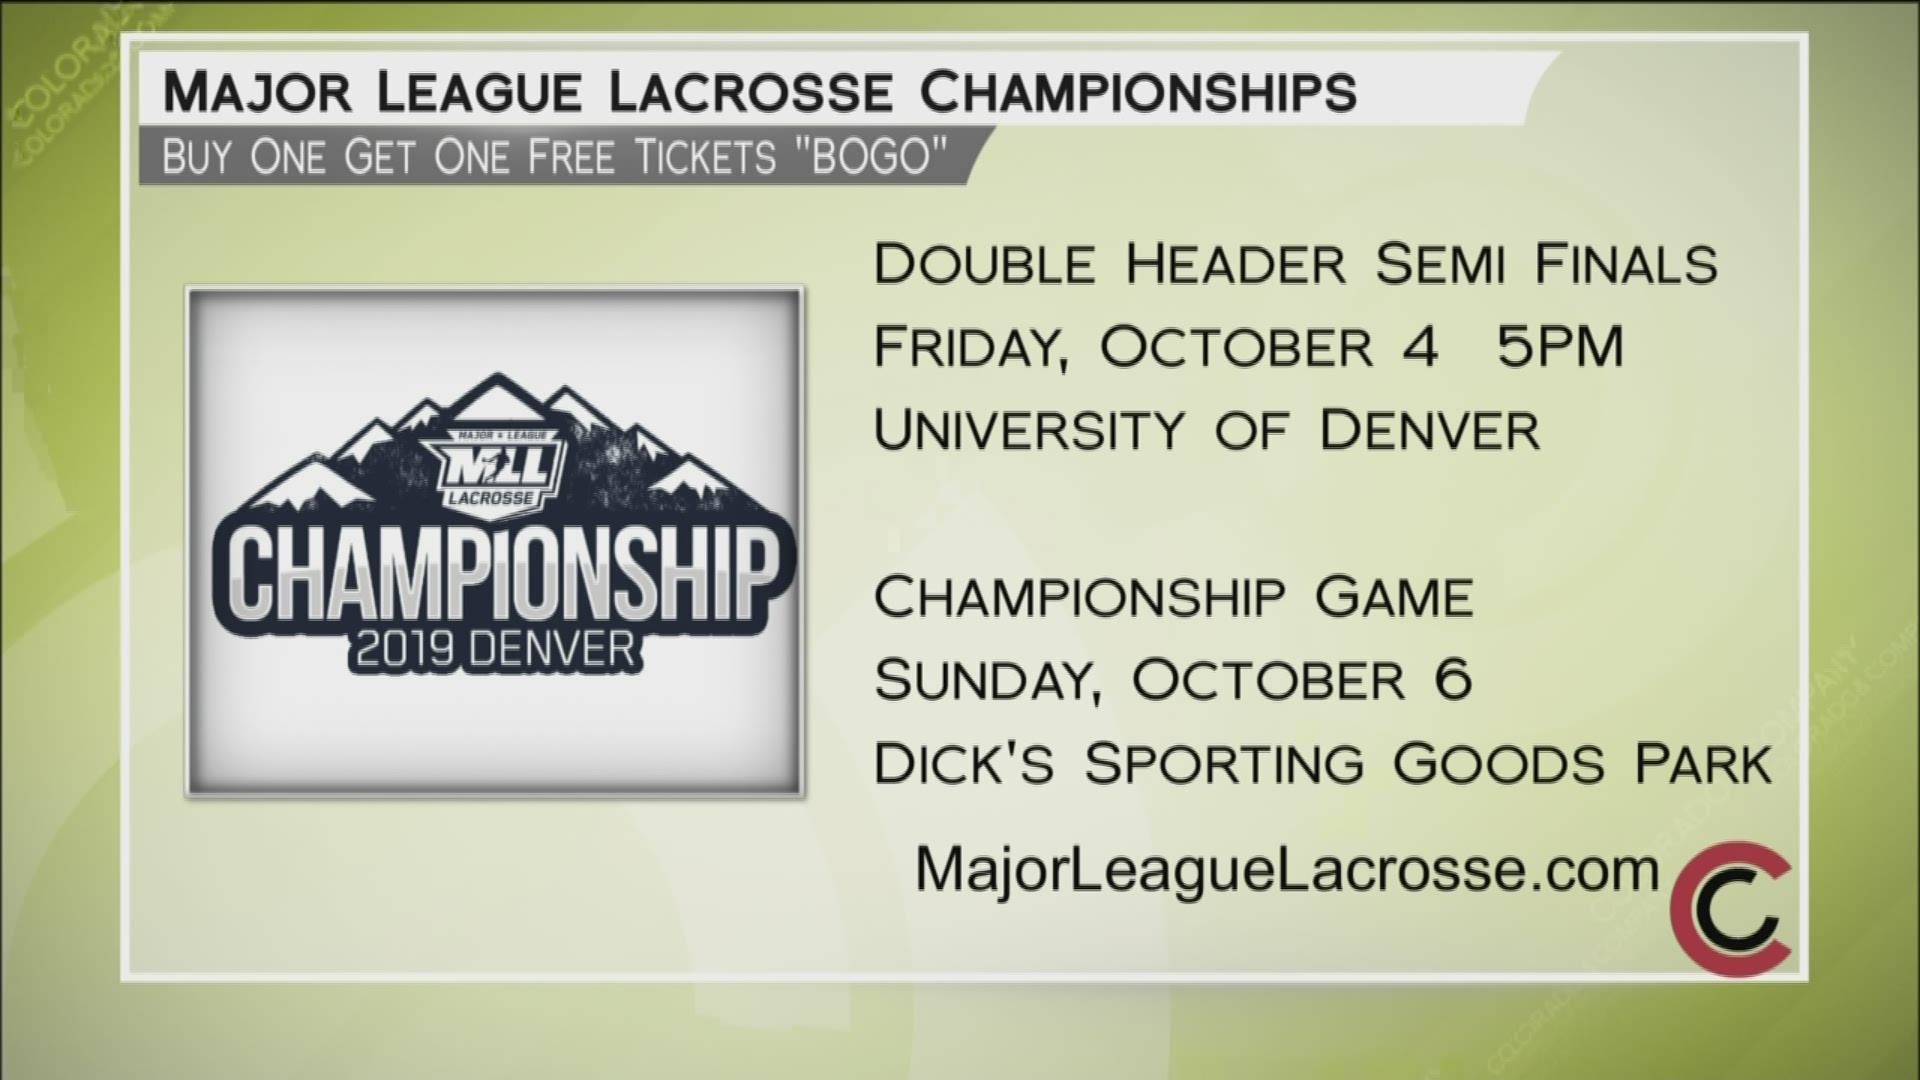 Catch the Denver outlaws defend their title at the MLL Championships this weekend. Get your tickets and learn more at www.MajorLeagueLacrosse.com.